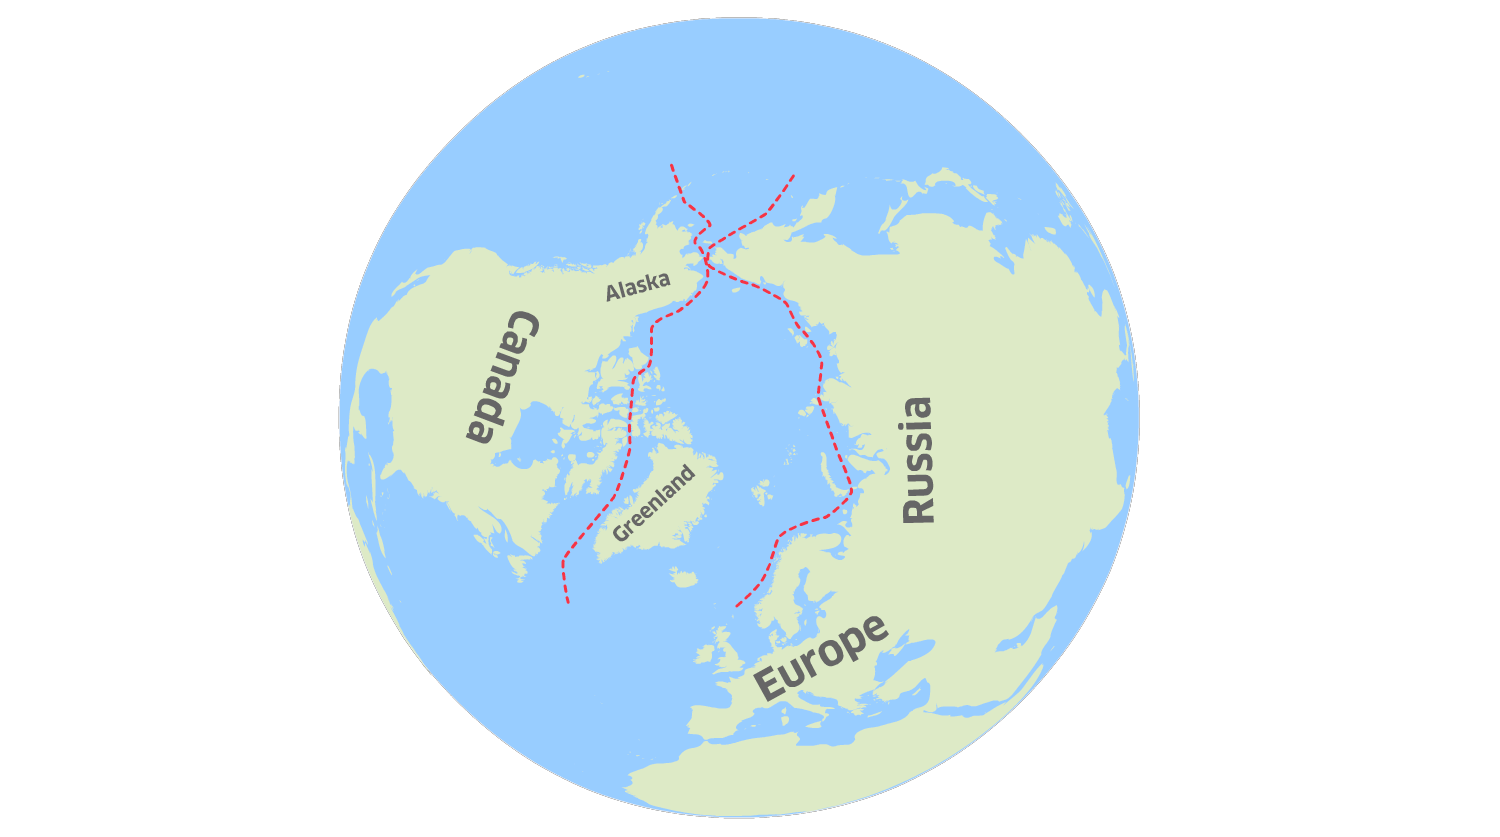 The North West Passage and the Northern Sea Route.